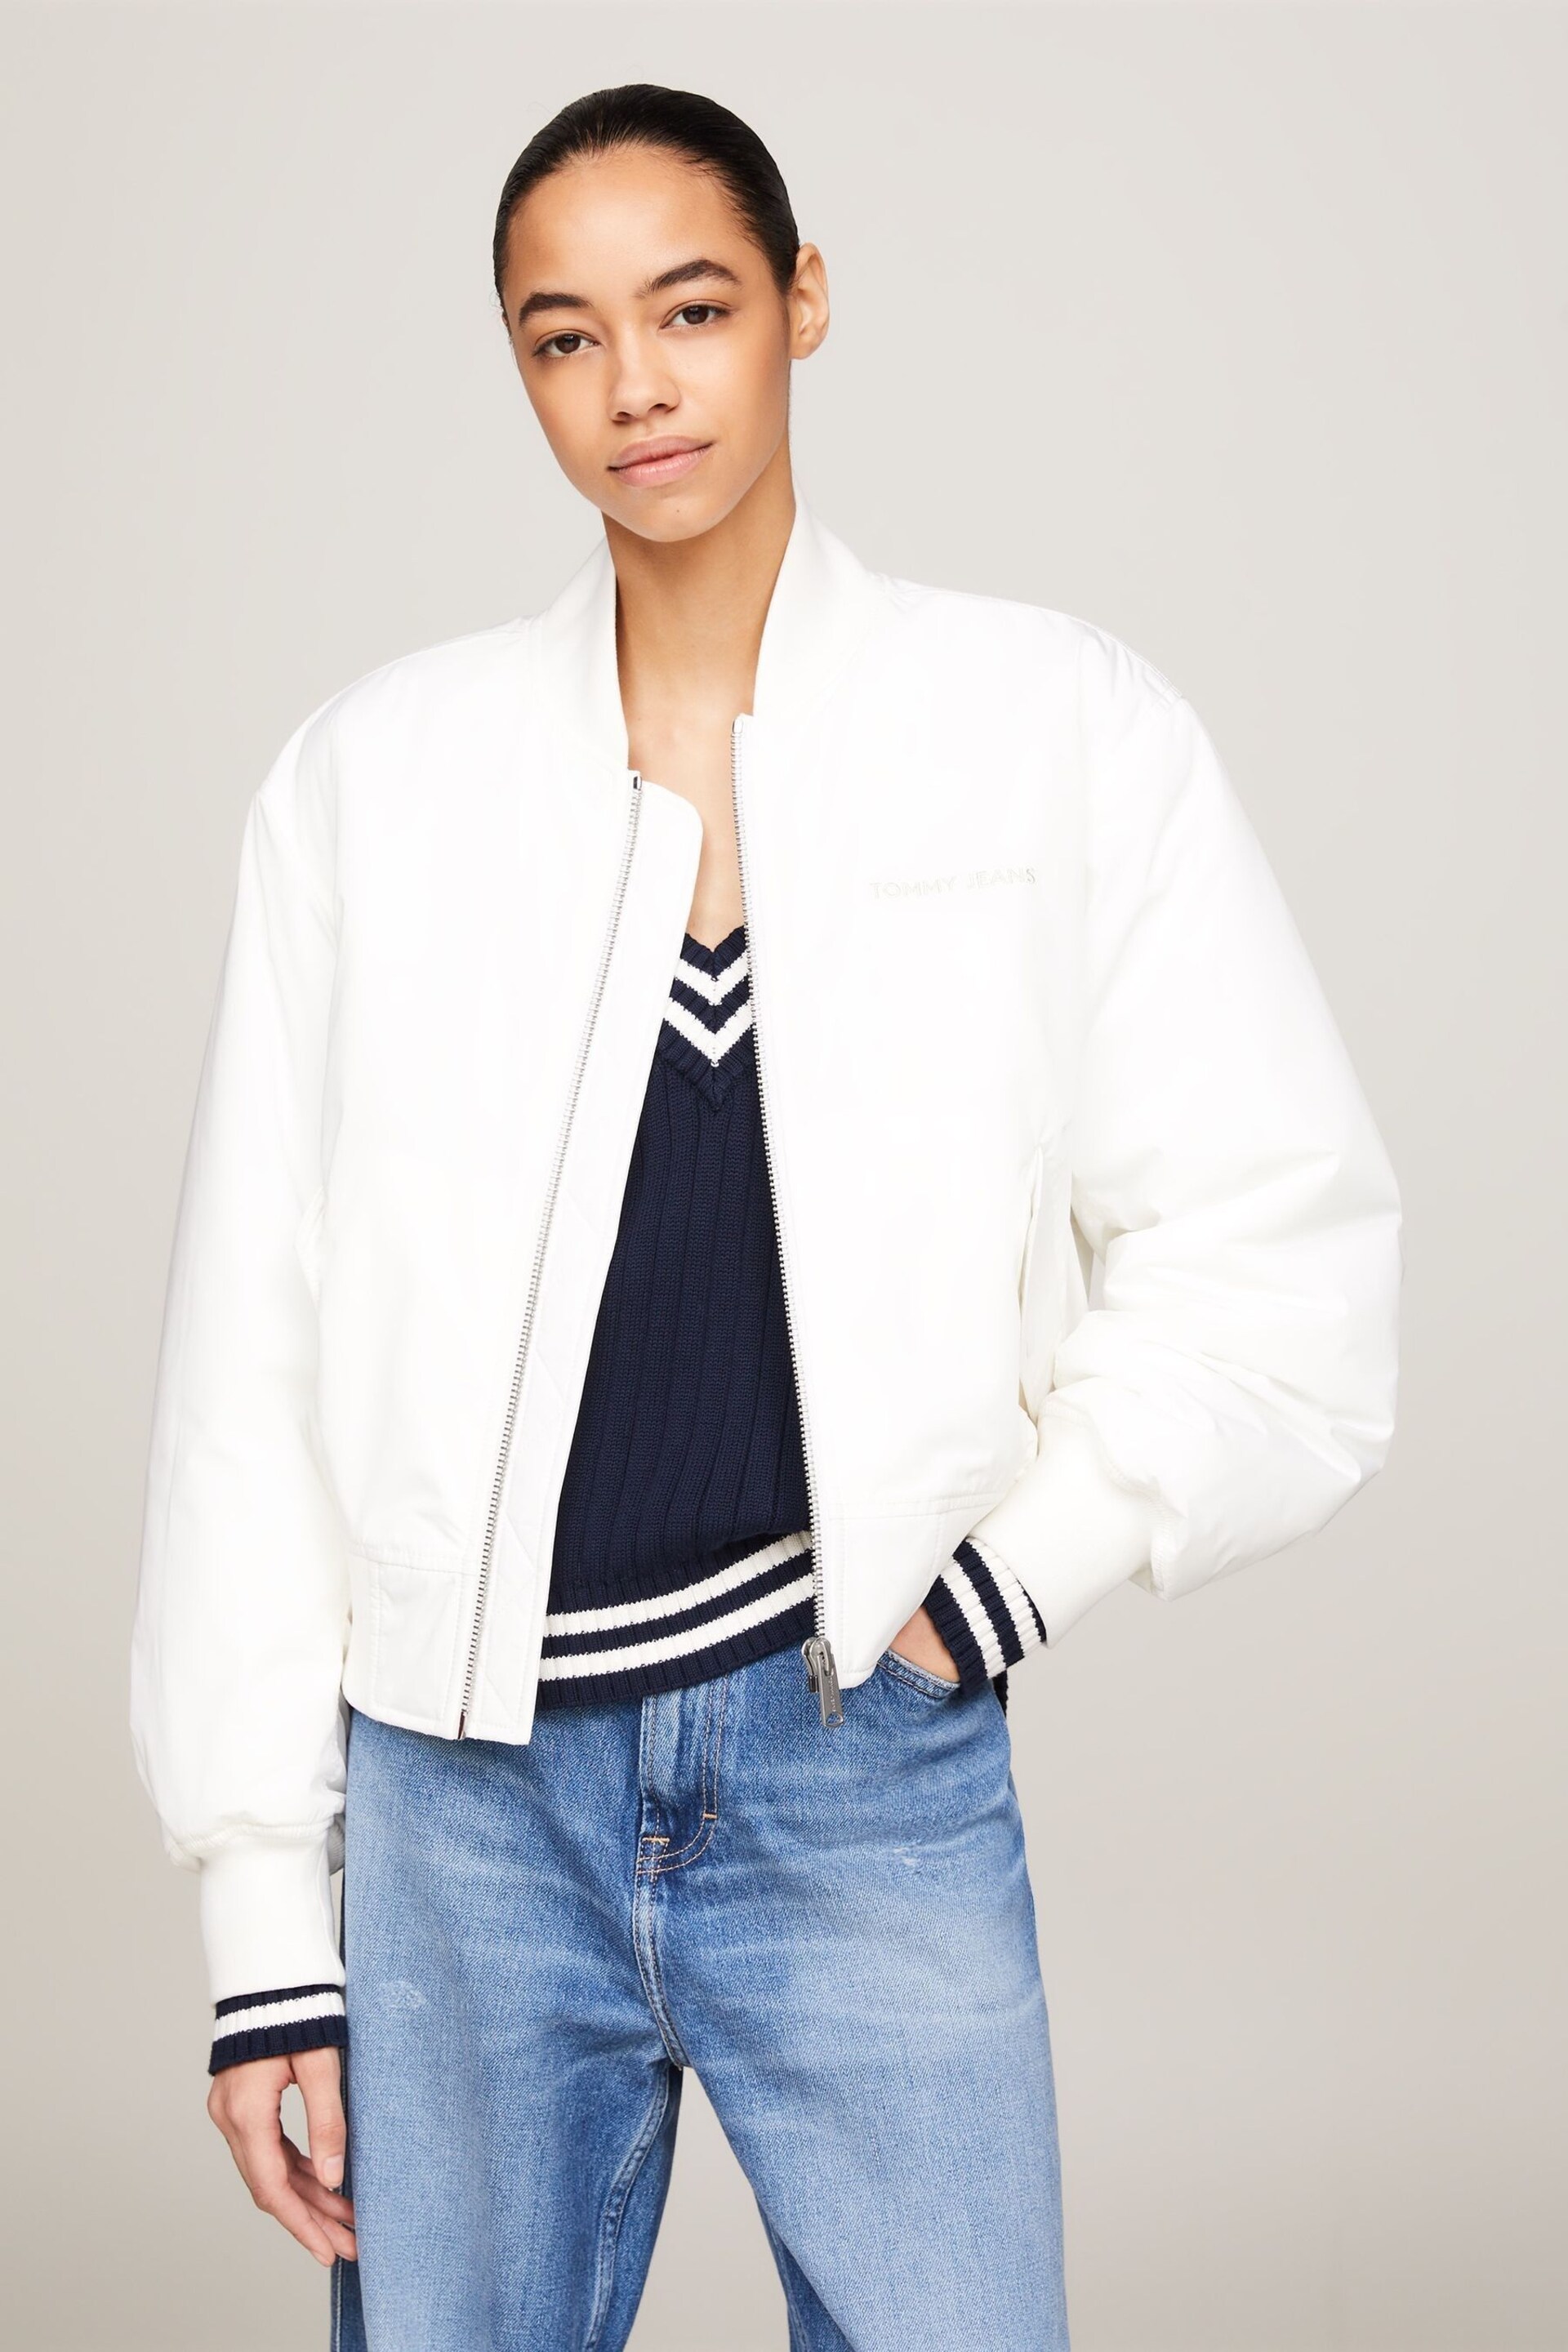 Tommy Jeans Classics Bomber Jacket - Image 1 of 7